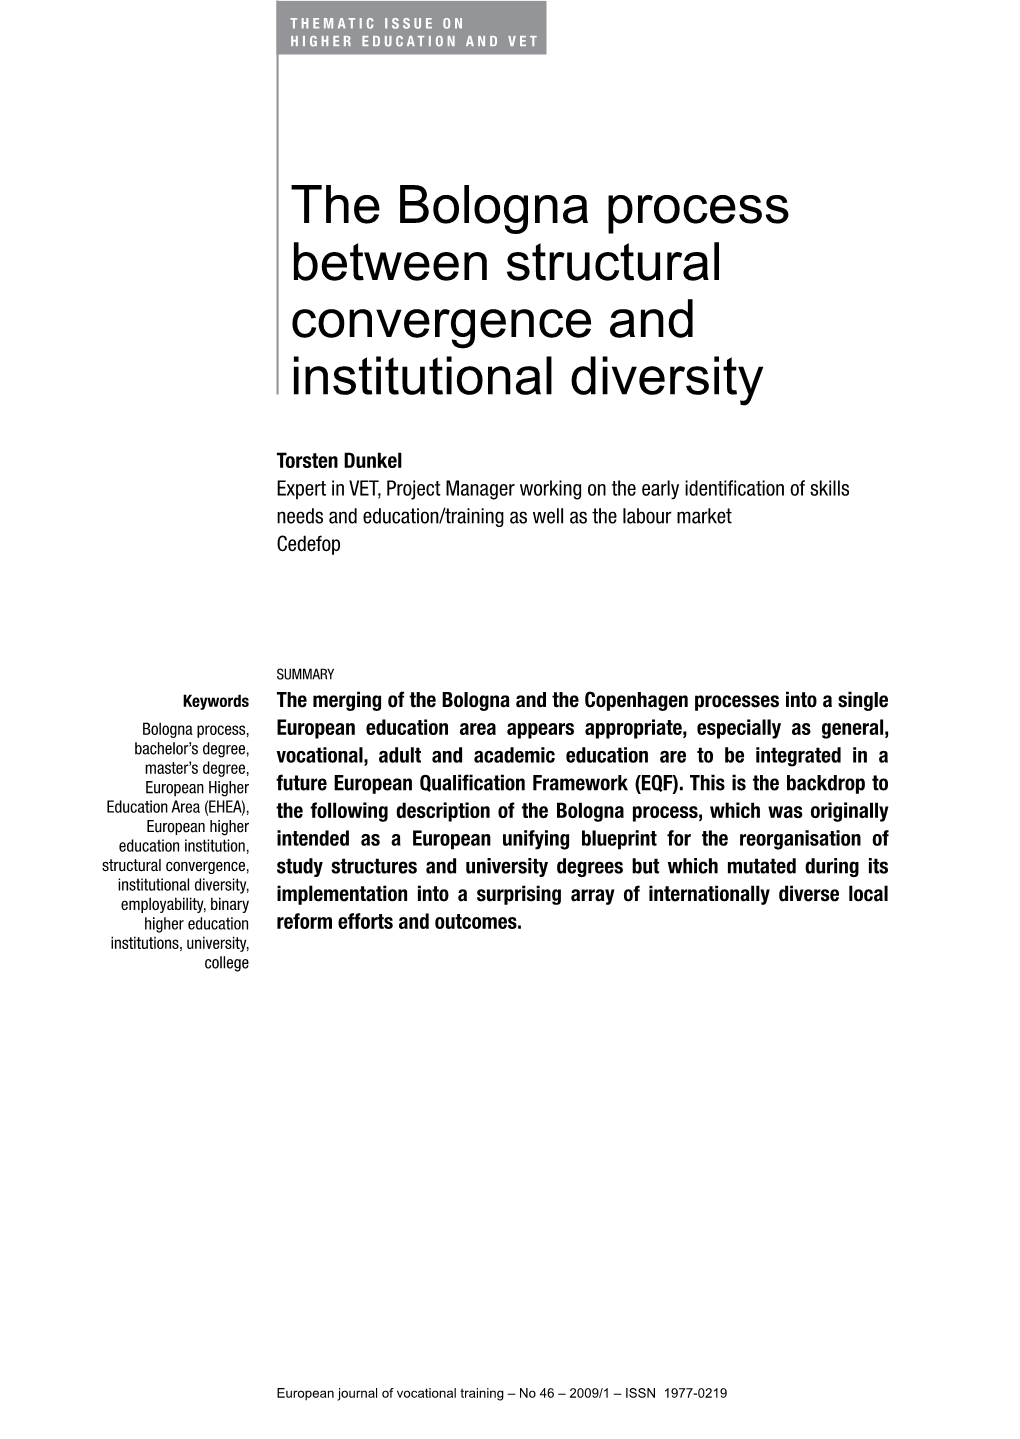 The Bologna Process Between Structural Convergence and Institutional Diversity